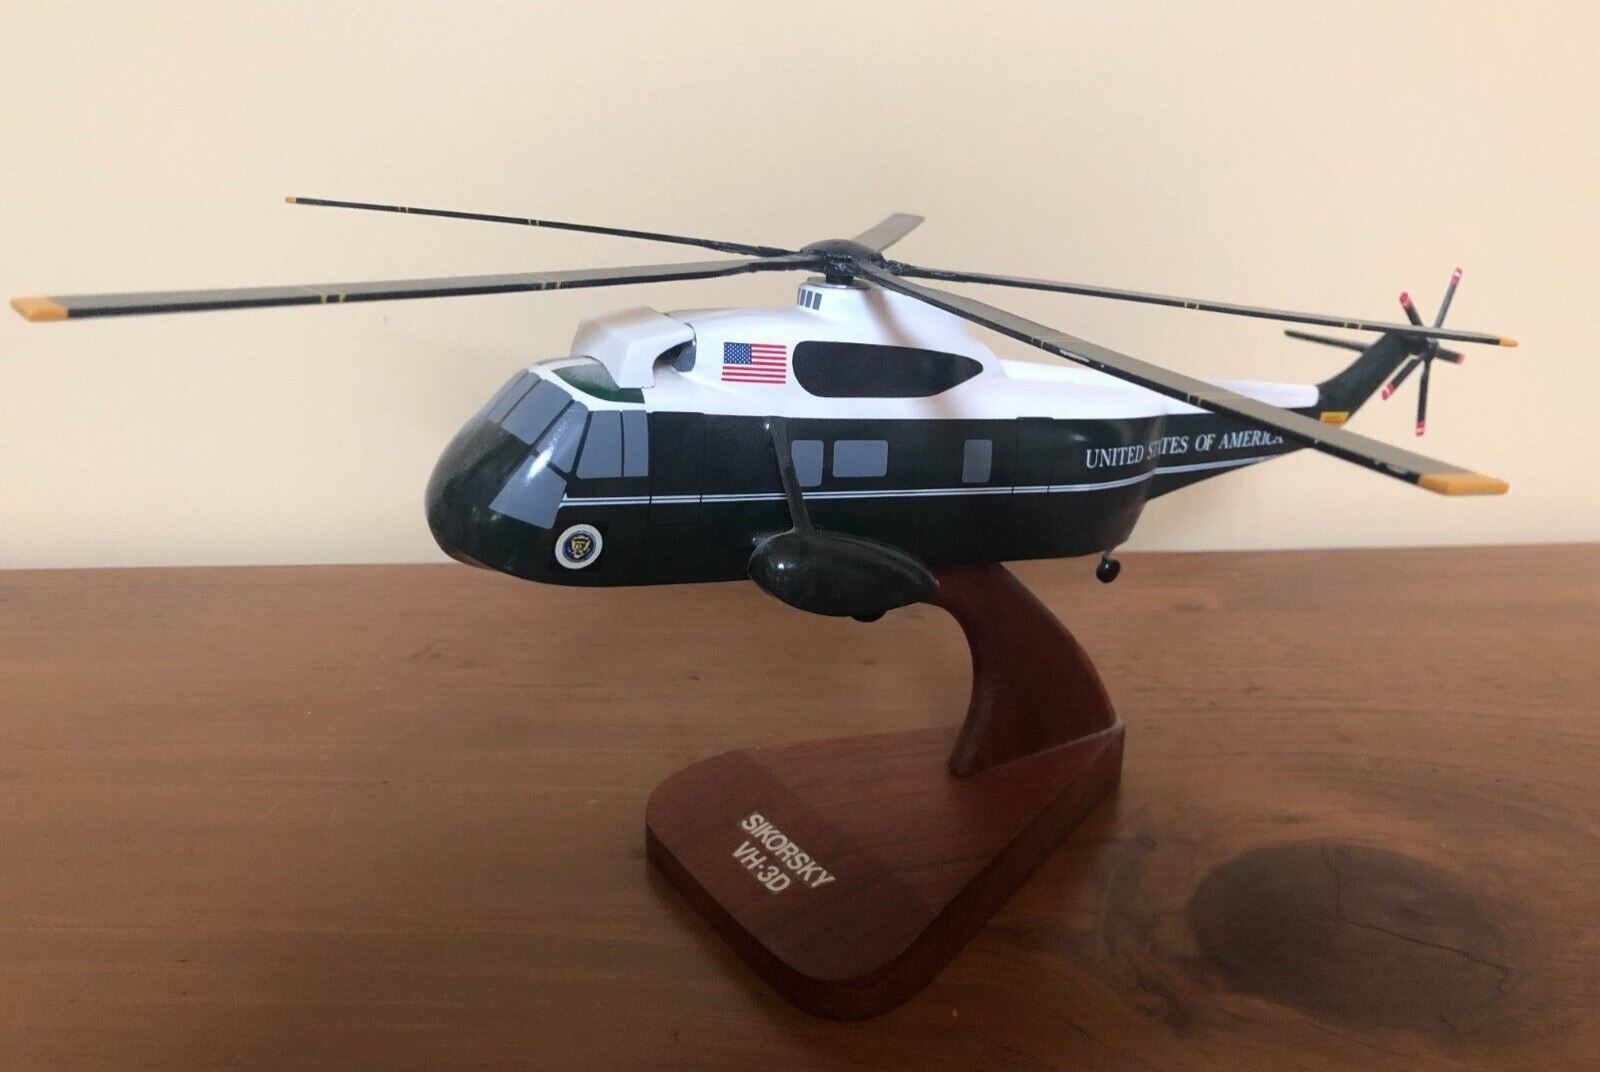 Sikorsky VH-3D Sea King Marine One Presidential Helicopter Desk Model with Base